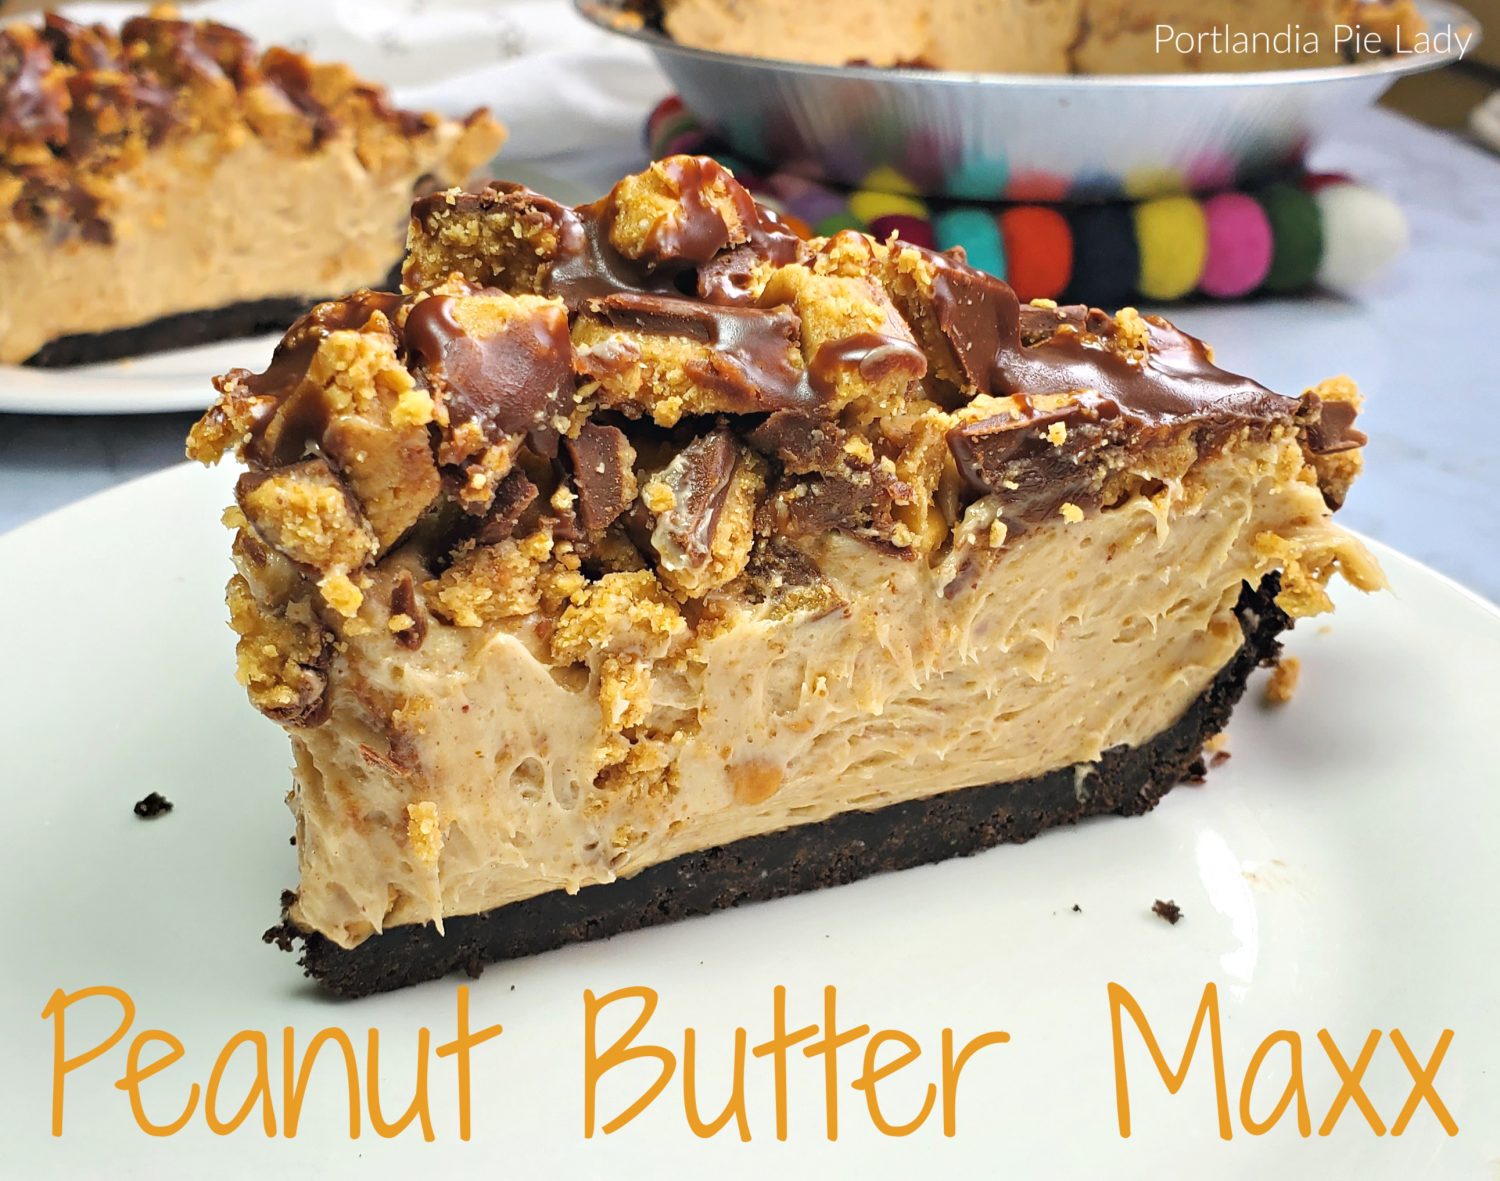 Peanut butter & cream cheese combined with whipped cream into a luscious filling topped with homemade peanut butter cup topping & milk chocolate ganache!